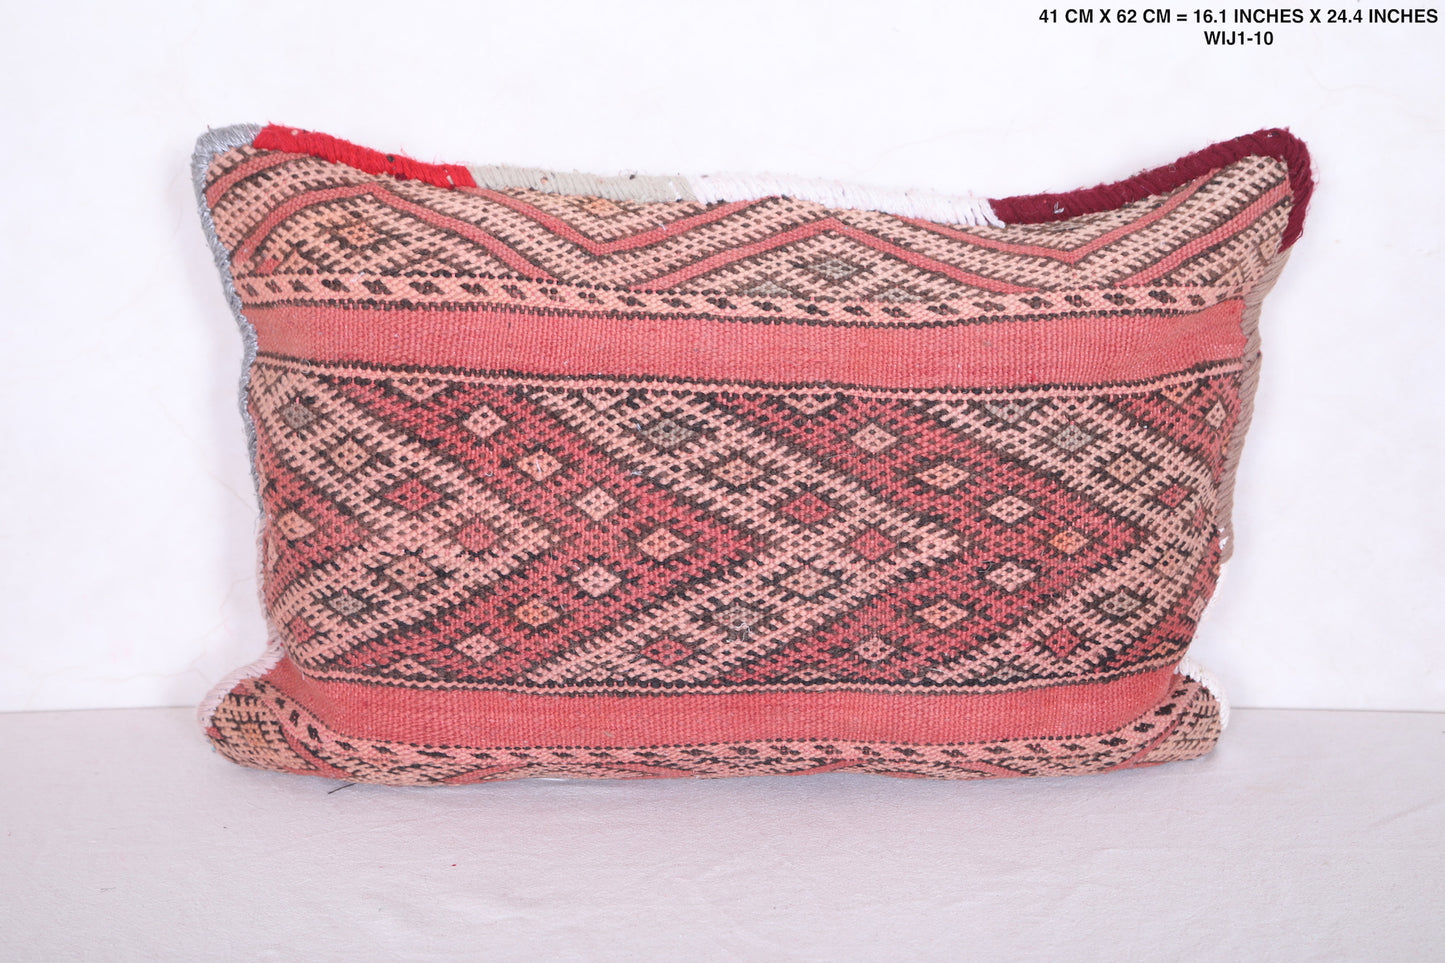 Moroccan handmade kilim pillow 16.1 INCHES X 24.4 INCHES